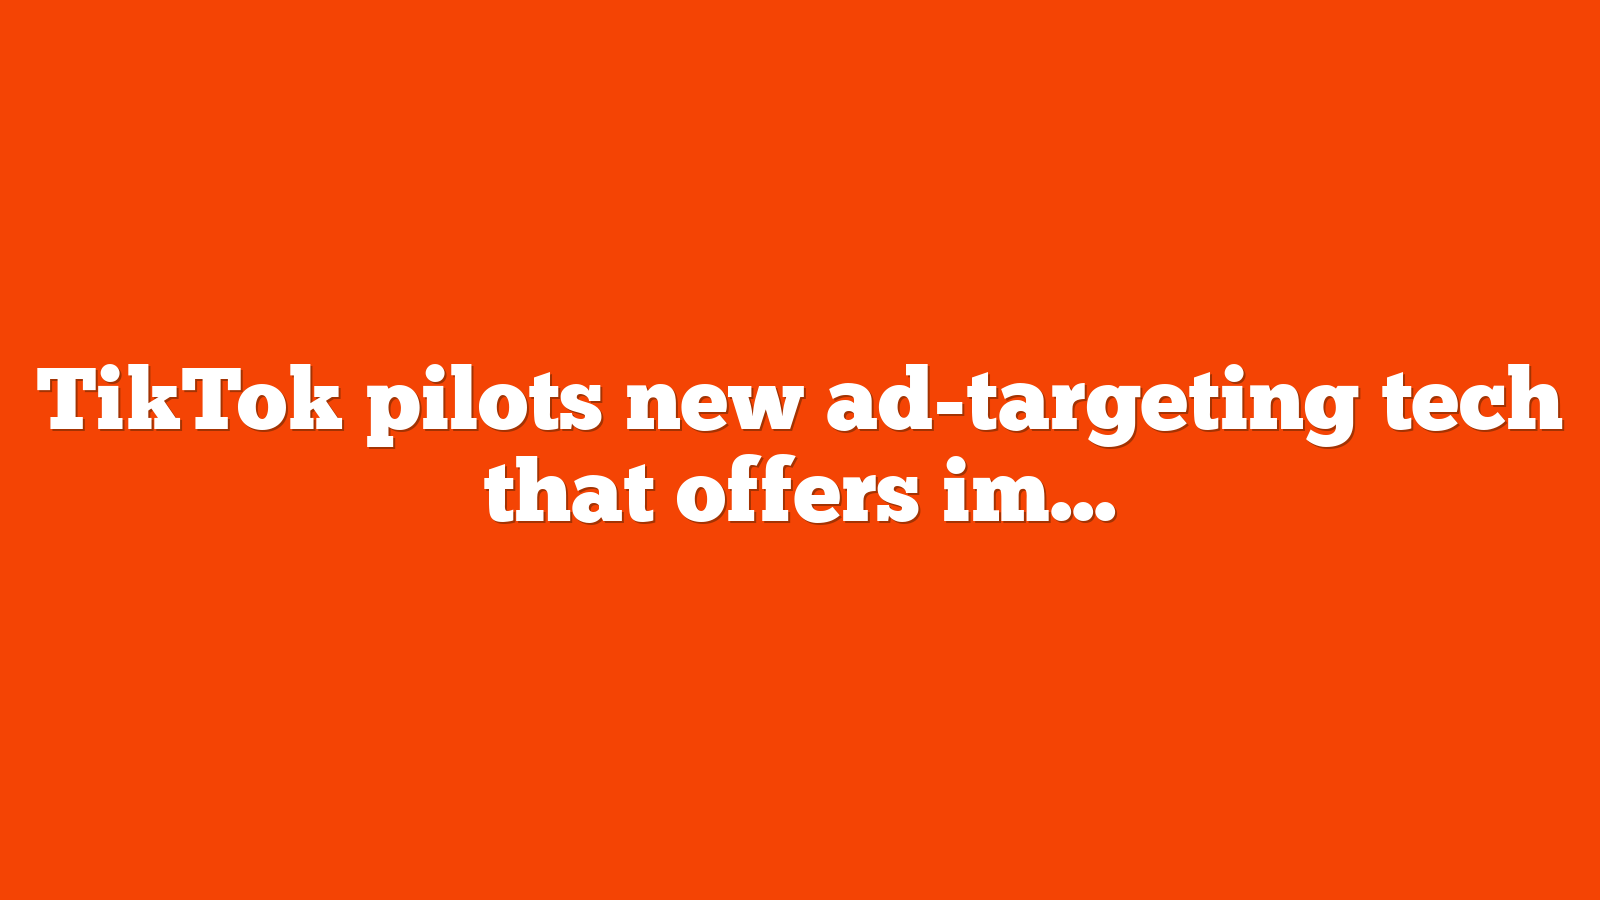 TikTok pilots new ad targeting tech that offers improved data security